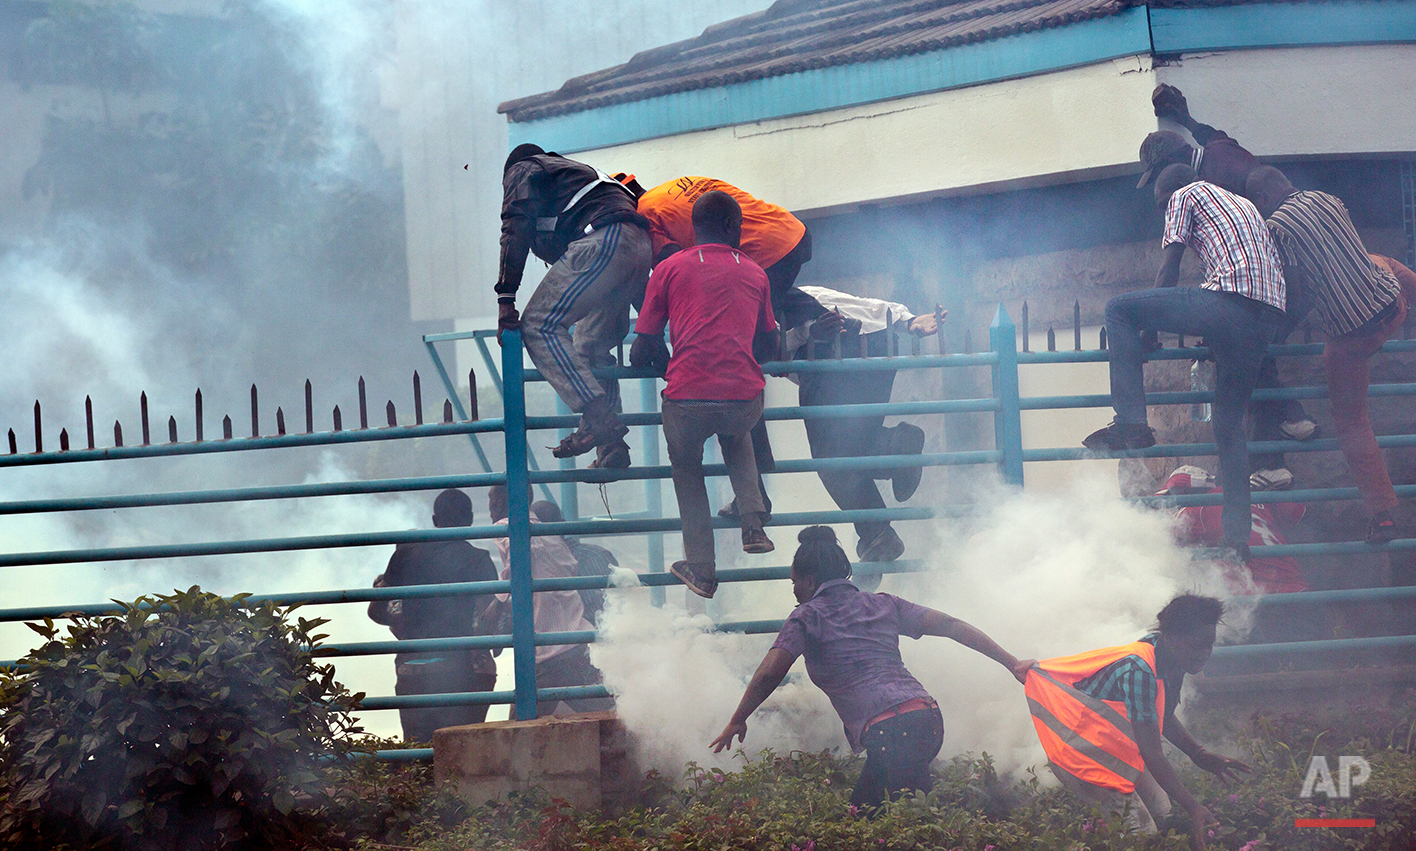  Opposition supporters climb over a fence into the University of Nairobi campus, as they flee from clouds of tear gas fired by riot police, during a protest in downtown Nairobi, Kenya Monday, May 16, 2016. Kenyan police have tear-gassed and beaten op